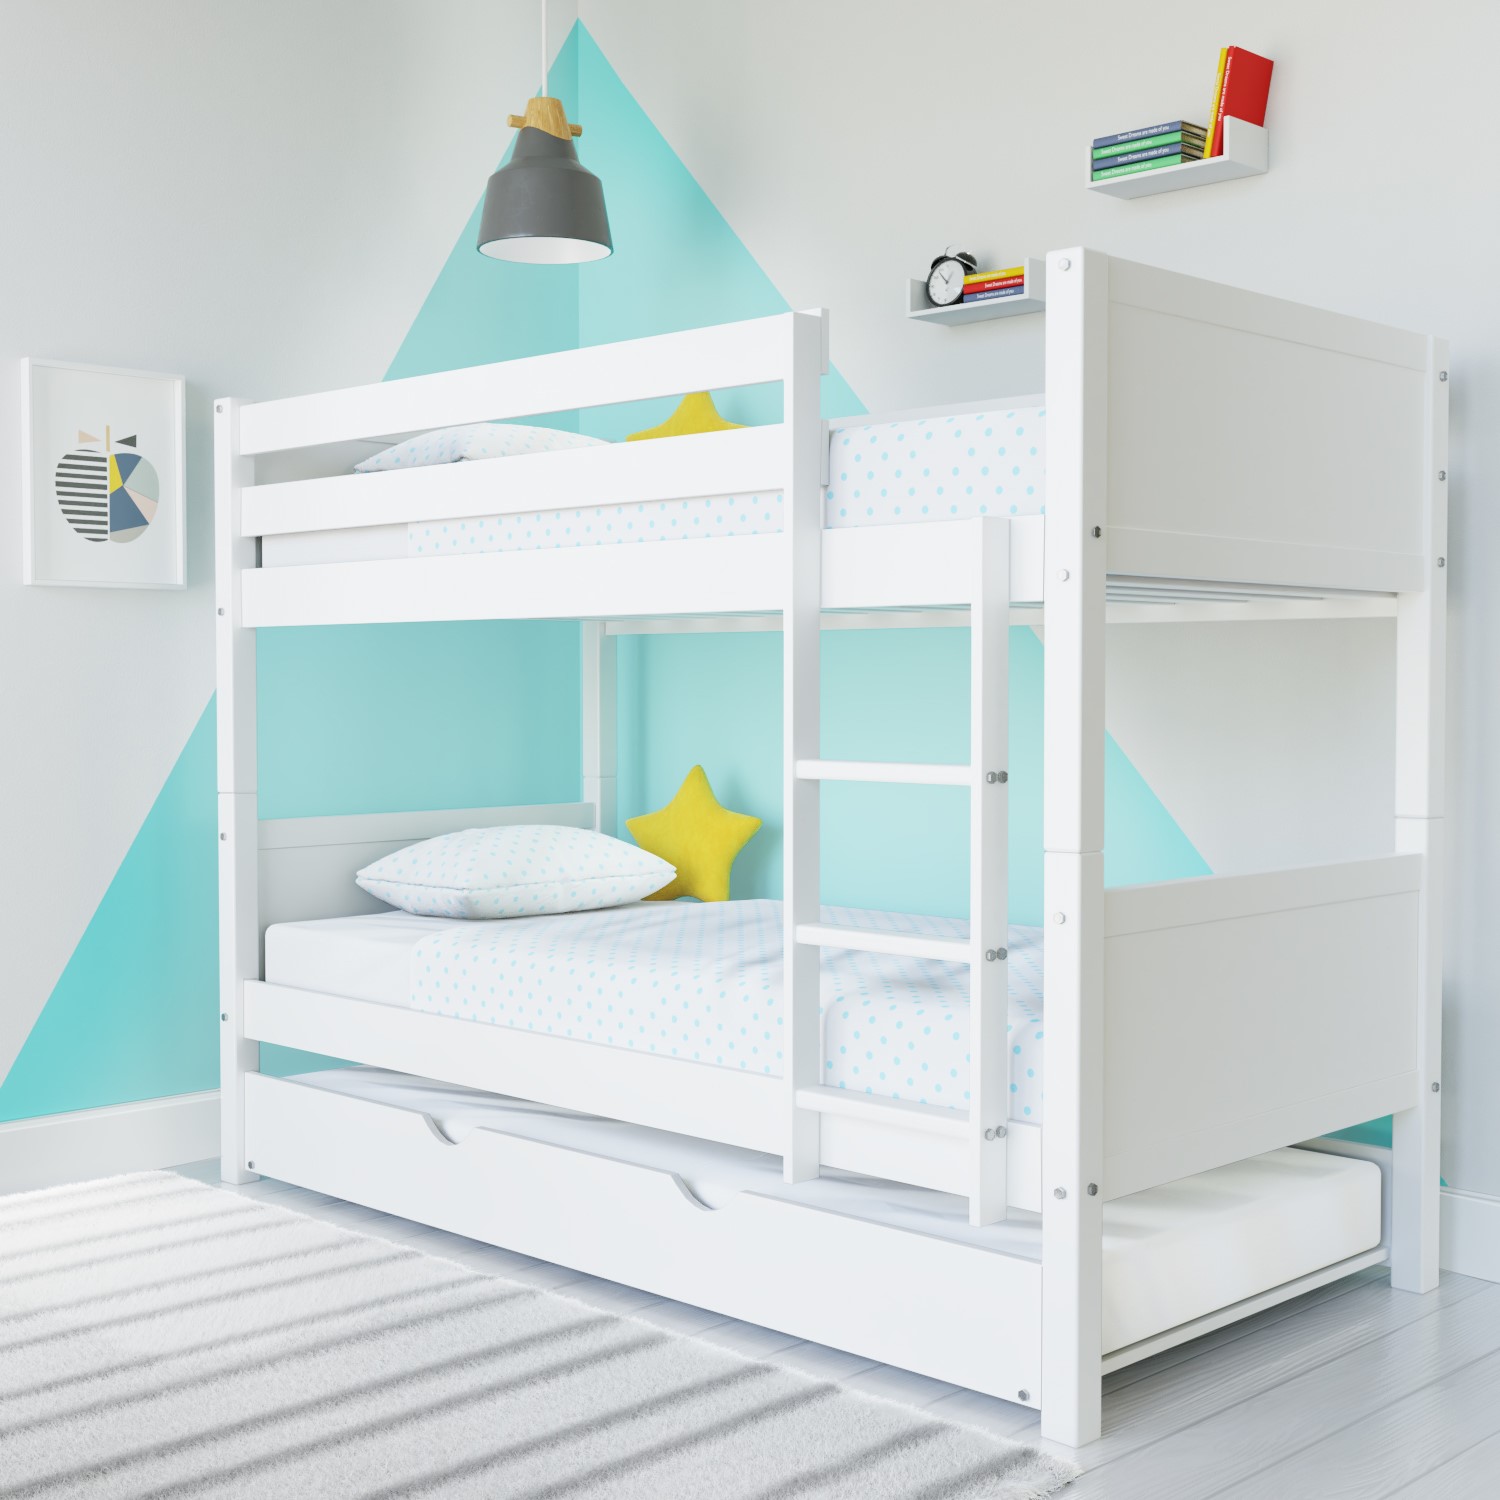 Read more about White wooden detachable bunk bed with trundle luca